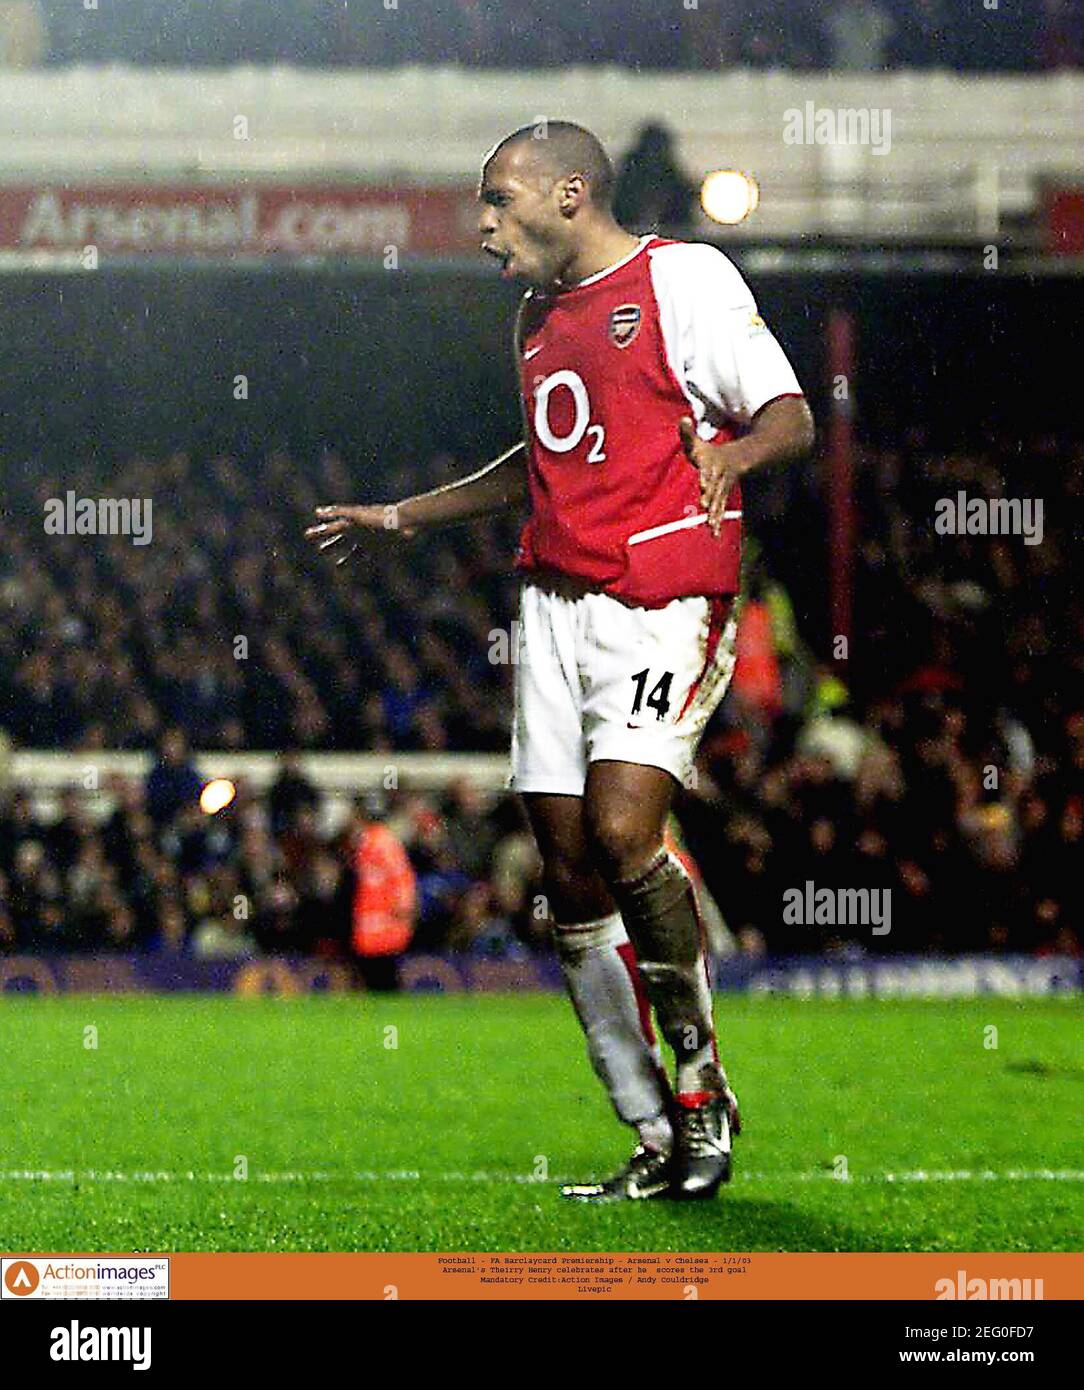 Football - FA Barclaycard Premiership - Arsenal v Chelsea - 1/1/03  Arsenal's Thierry Henry celebrates after he scores the 3rd goal Mandatory  Credit:Action Images / Andy Couldridge Livepic Stock Photo - Alamy